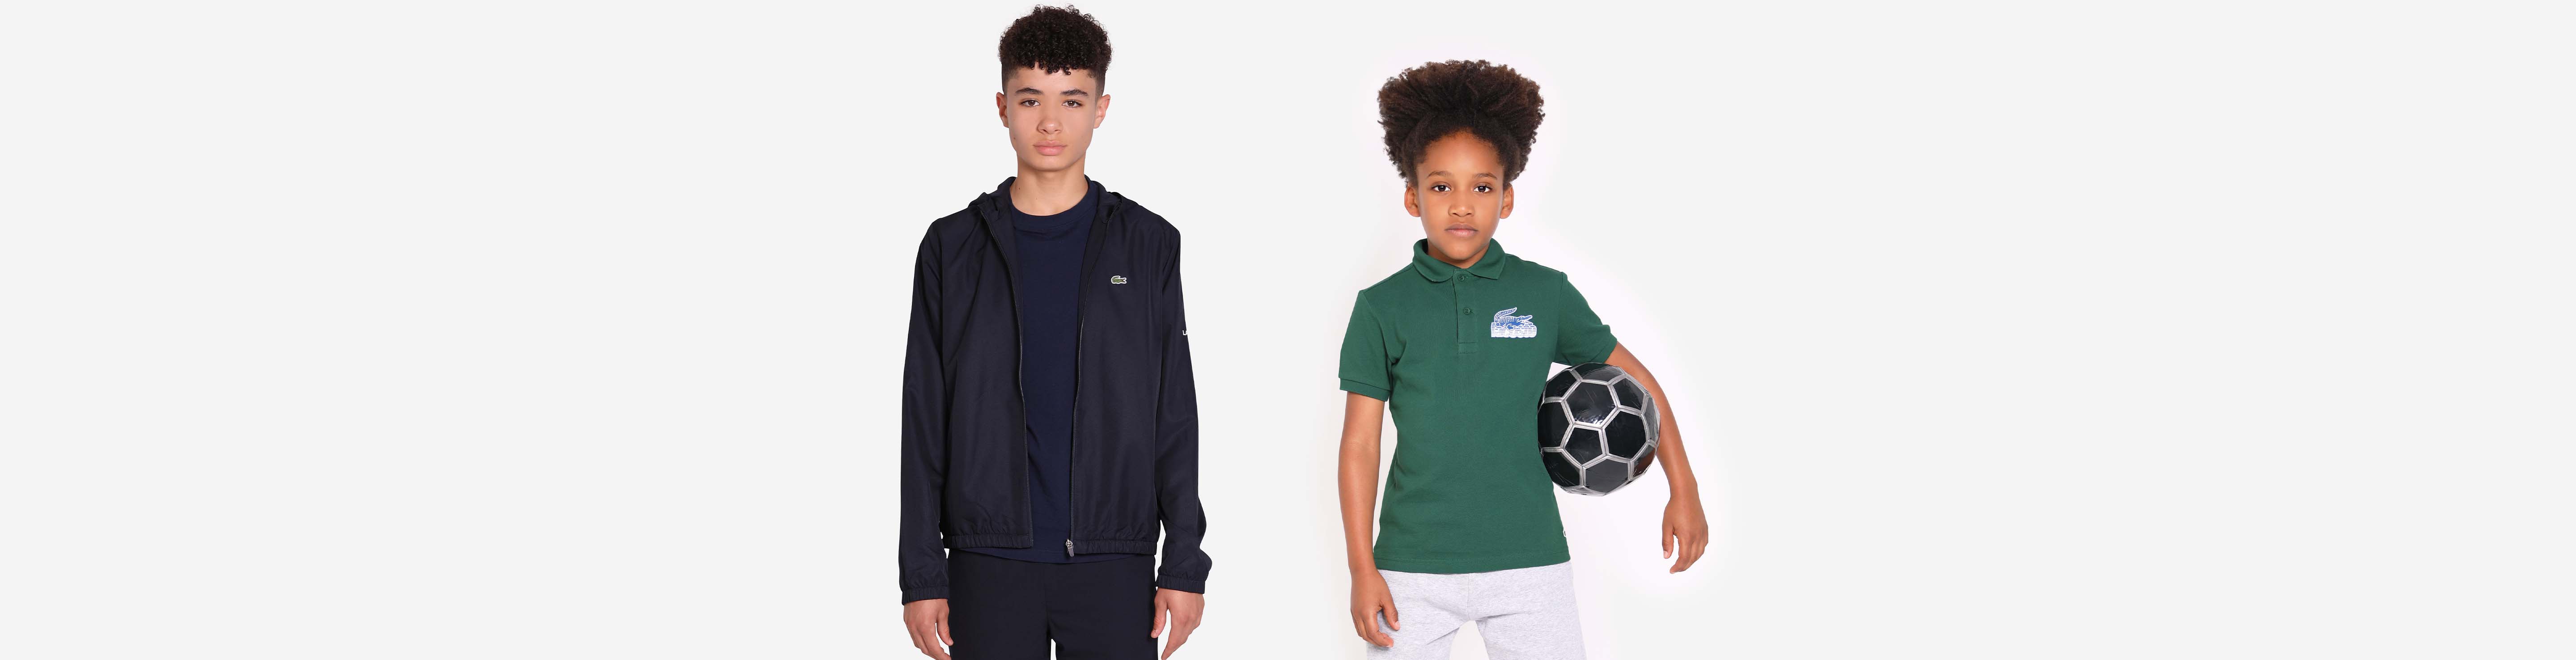 Lacoste Kids Clothes | Childsplay Clothing US